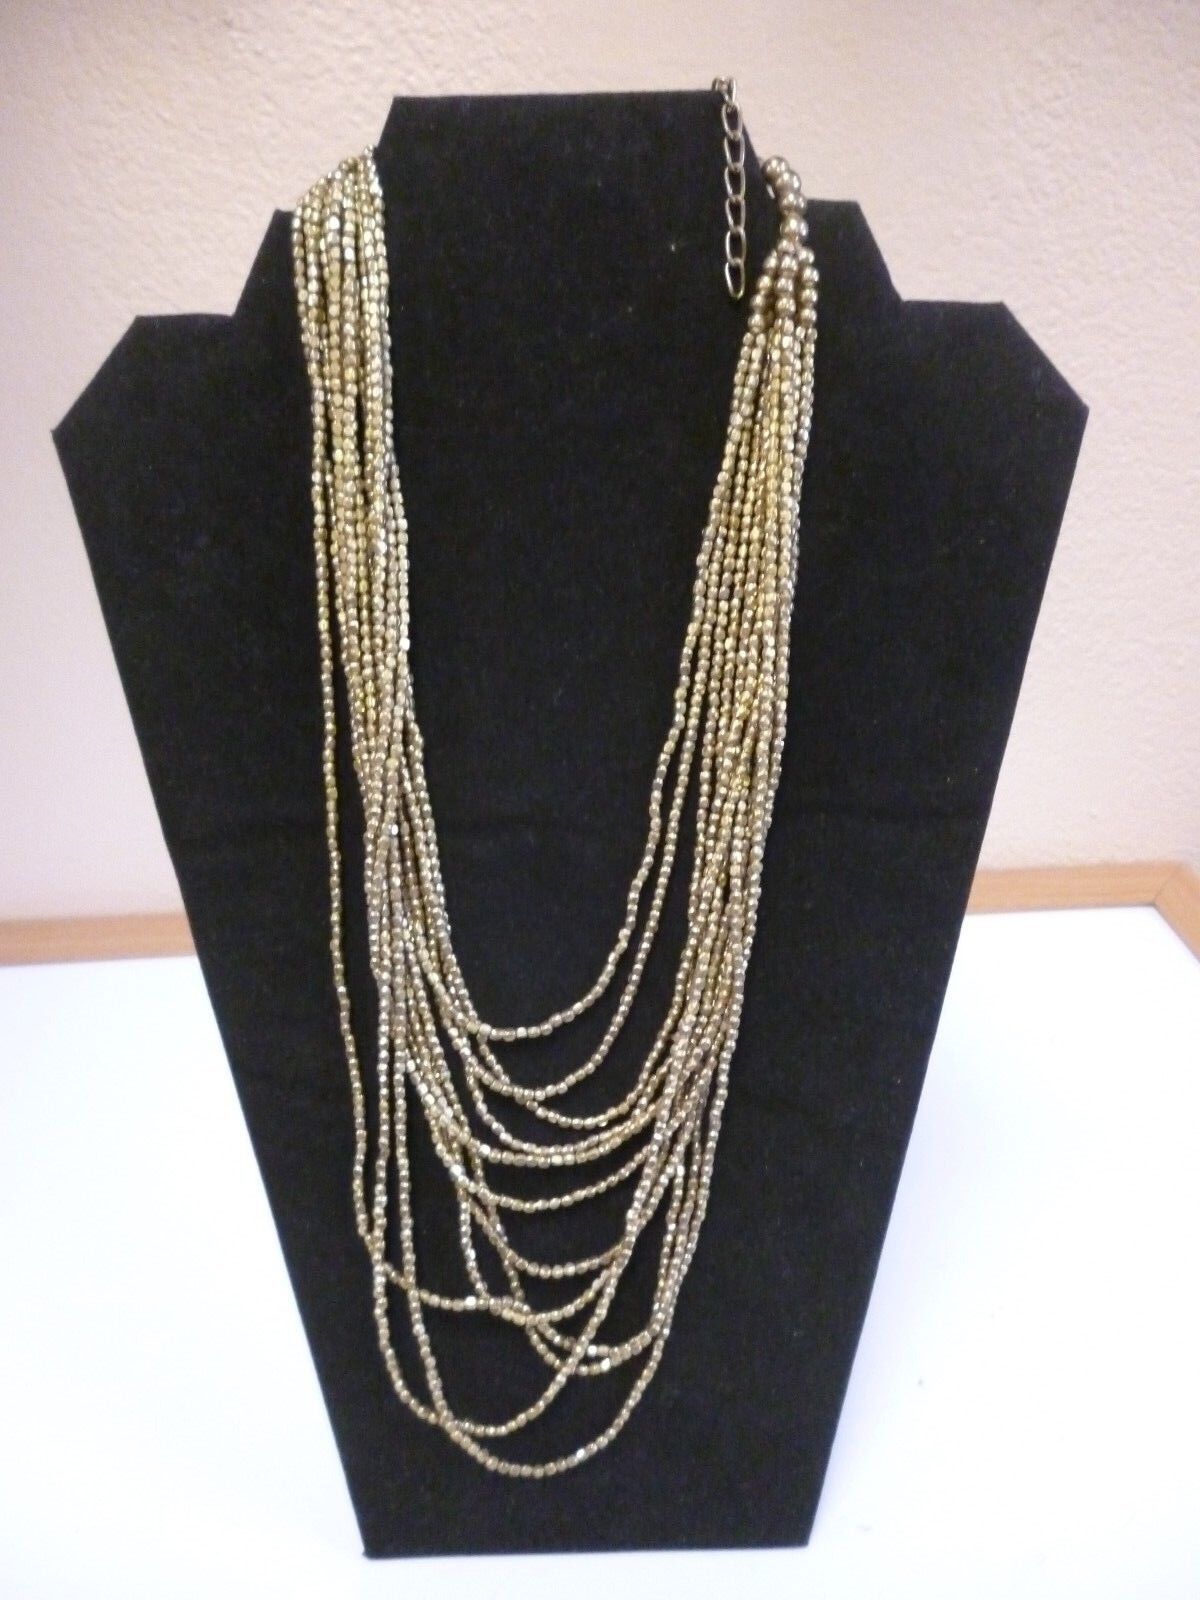 NWT Beautiful Pier 1 Imports Elegant Necklace Chain Gold Beaded 26\